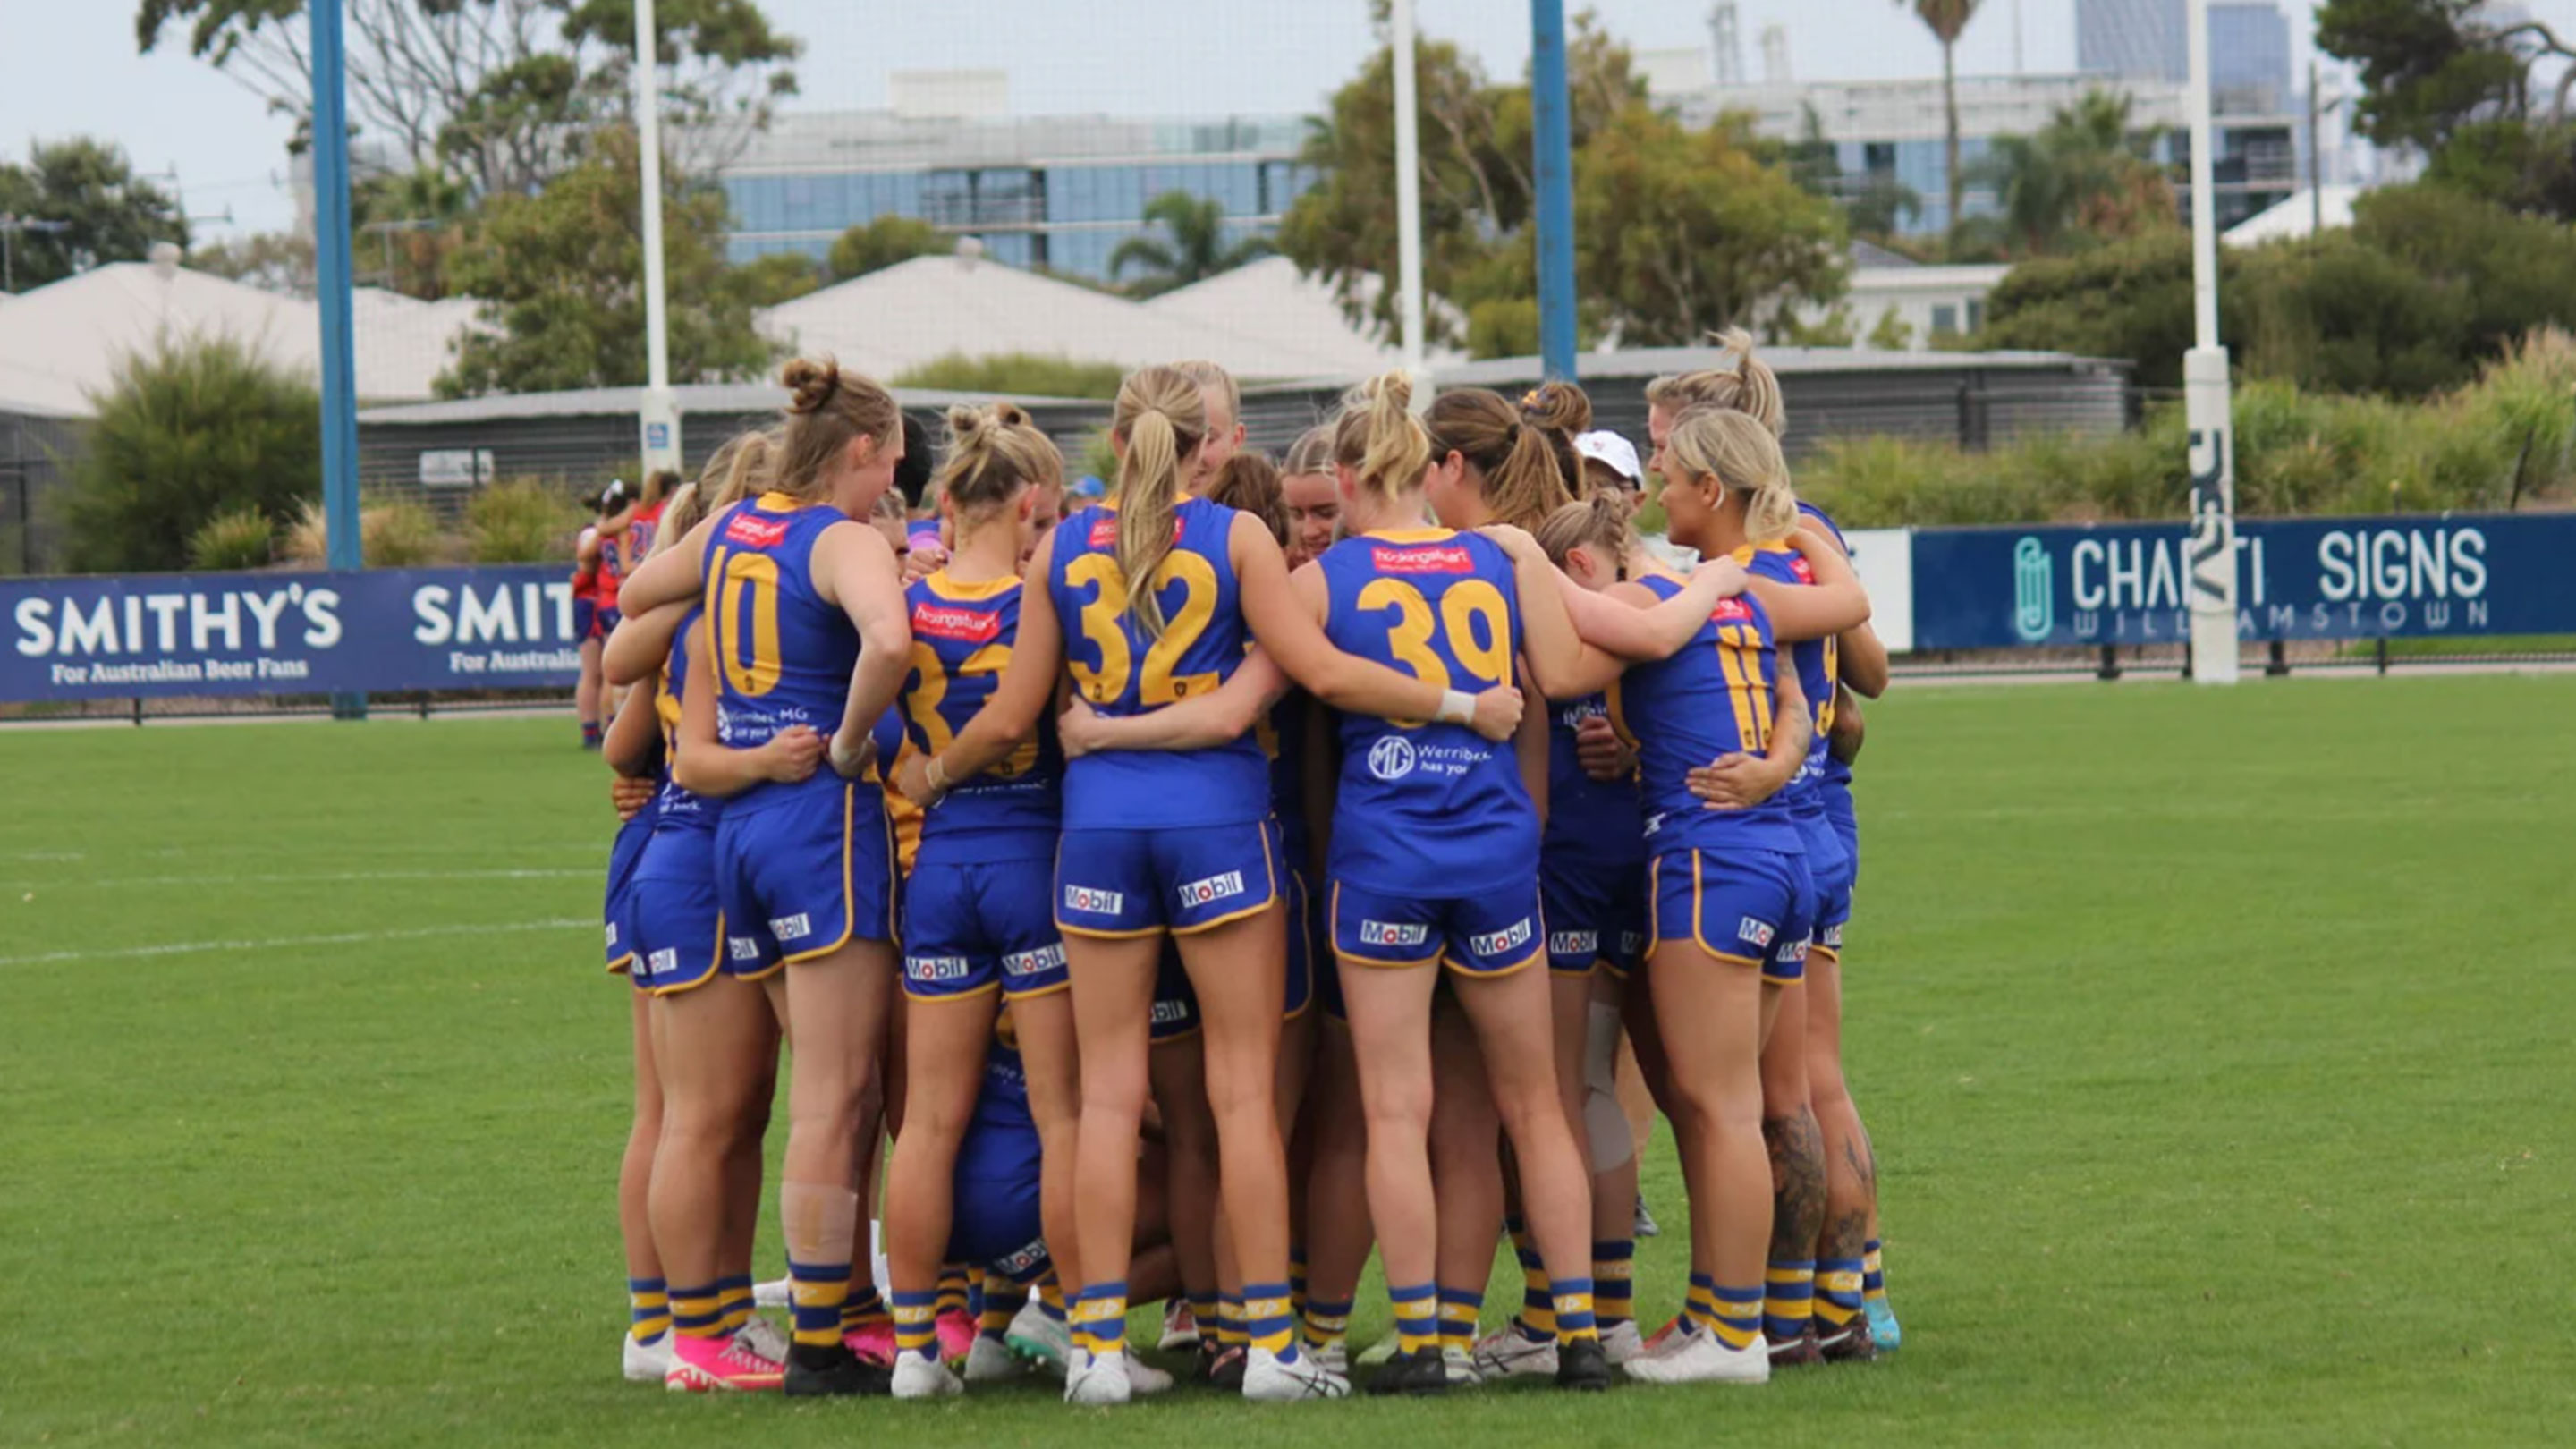 Mobil announces new partnership with community club Williamstown FC